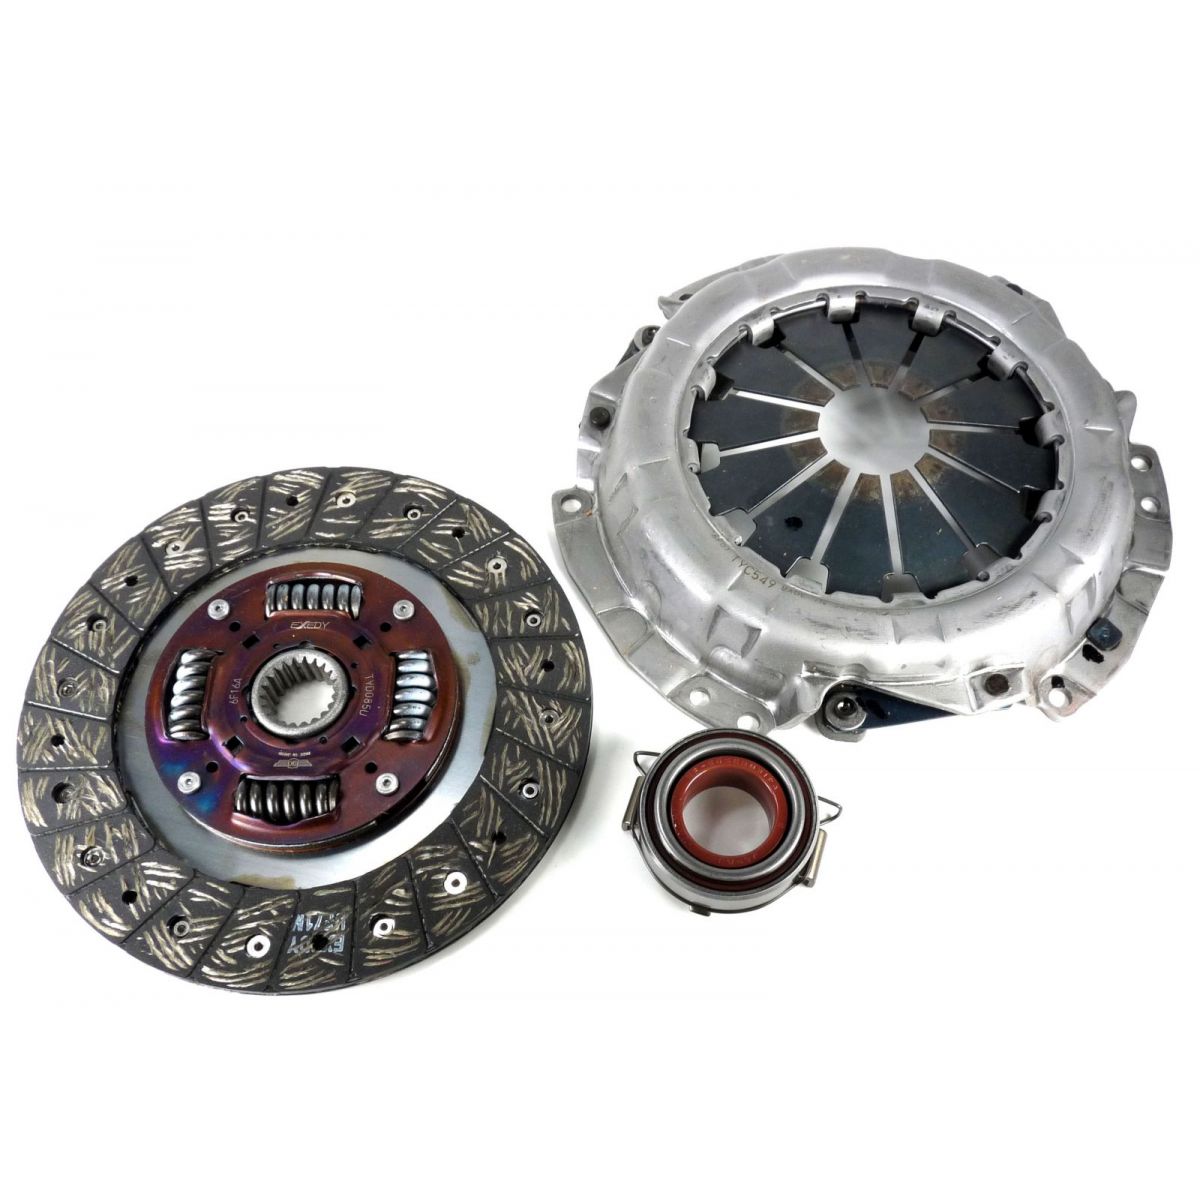 Details About Exedy Supercharged Clutch Set Kit For Chevy Cobalt Saturn Ion Red Line 2 0l